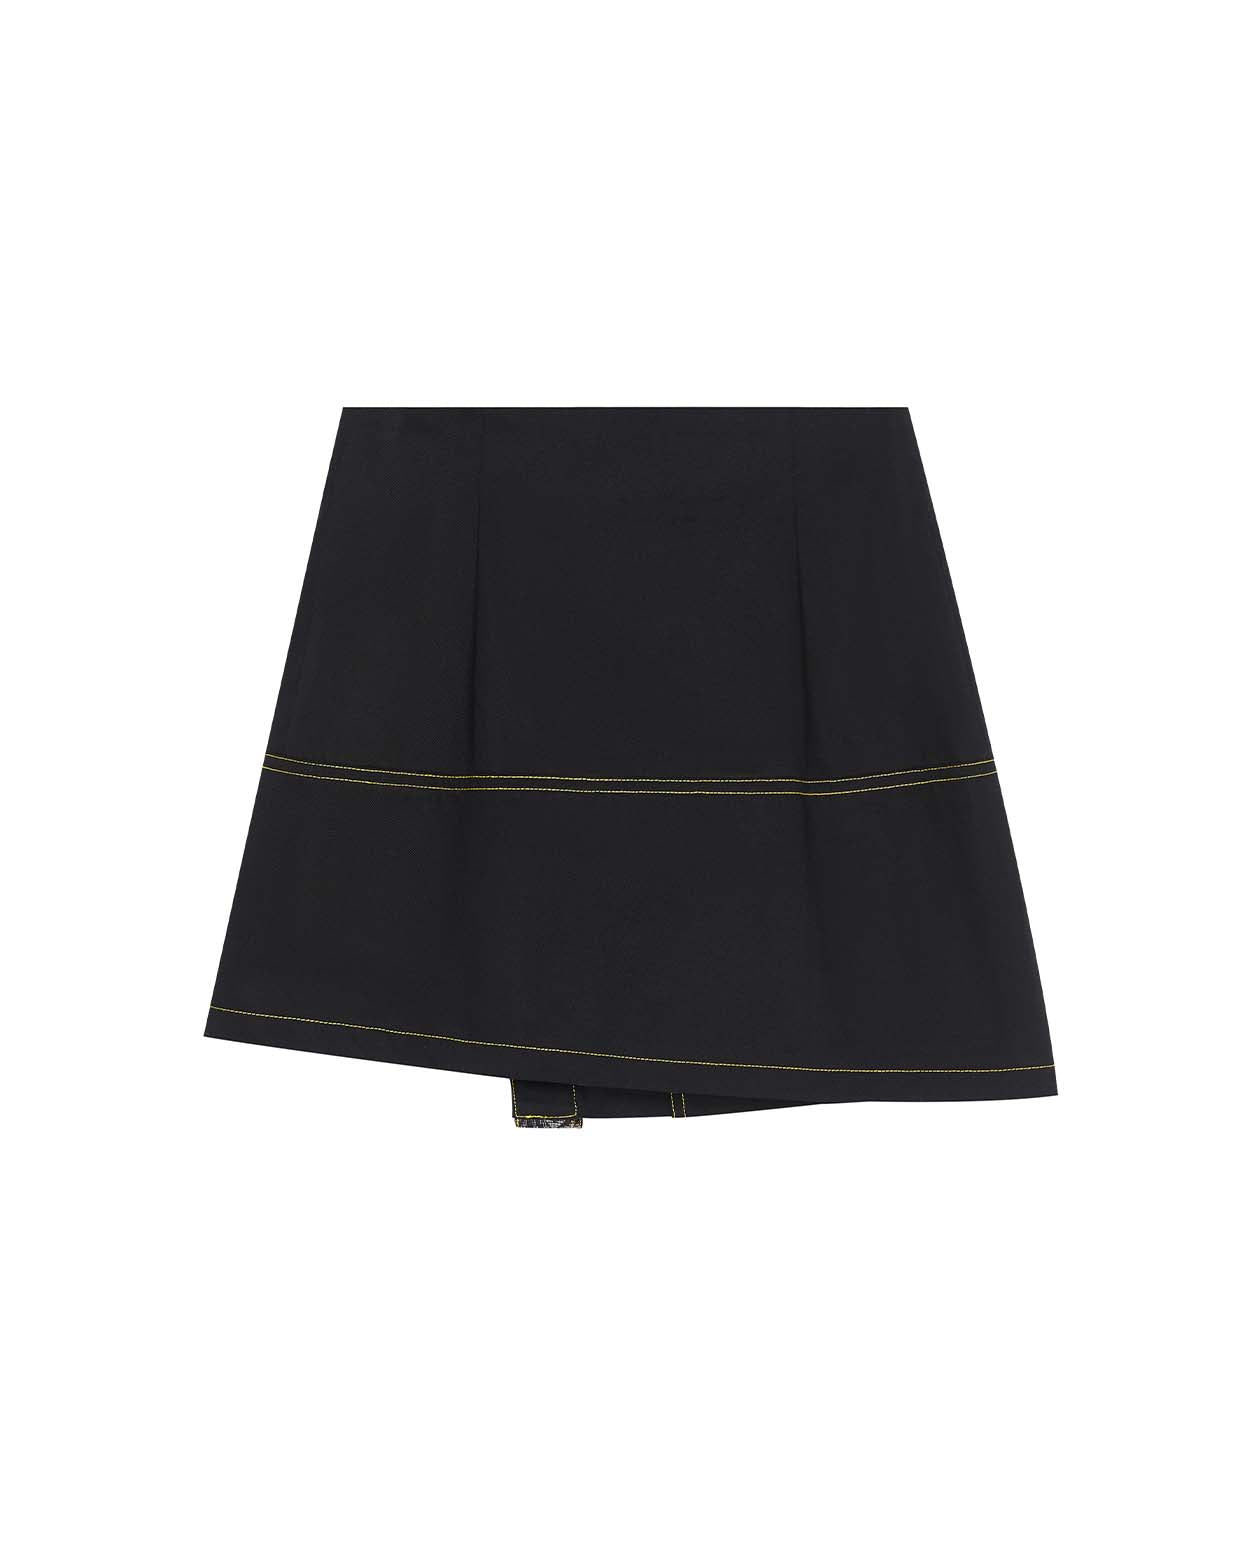 Load image into Gallery viewer, Triks Skirt (Black)
